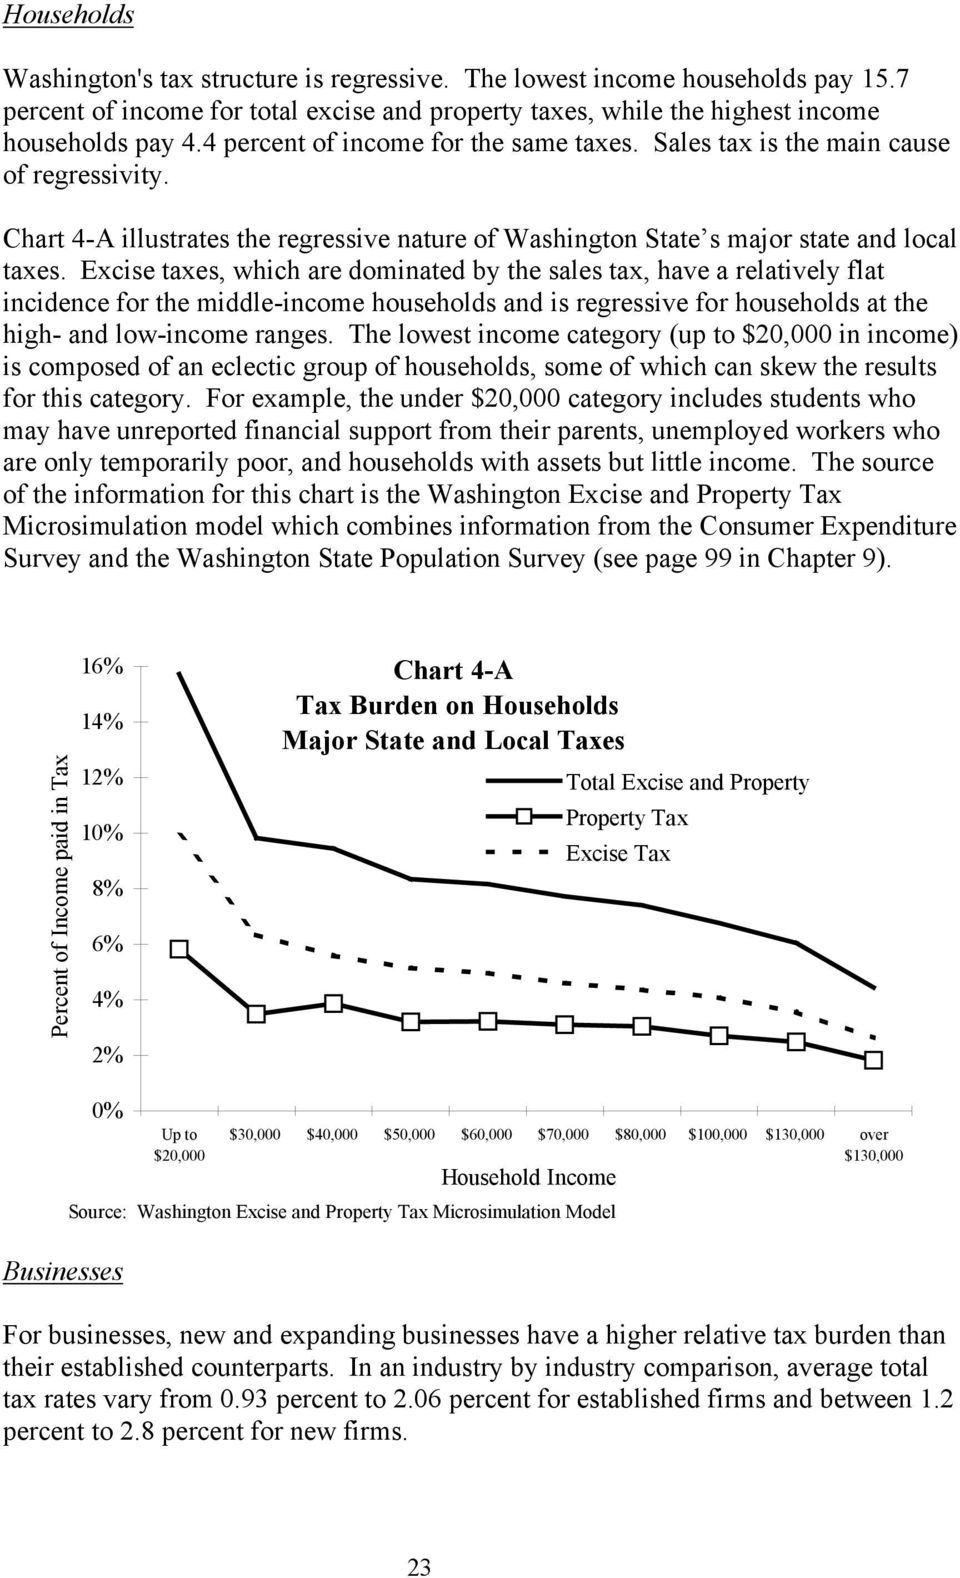 Excise taxes, which are dominated by the sales tax, have a relatively flat incidence for the middle-income households and is regressive for households at the high- and low-income ranges.